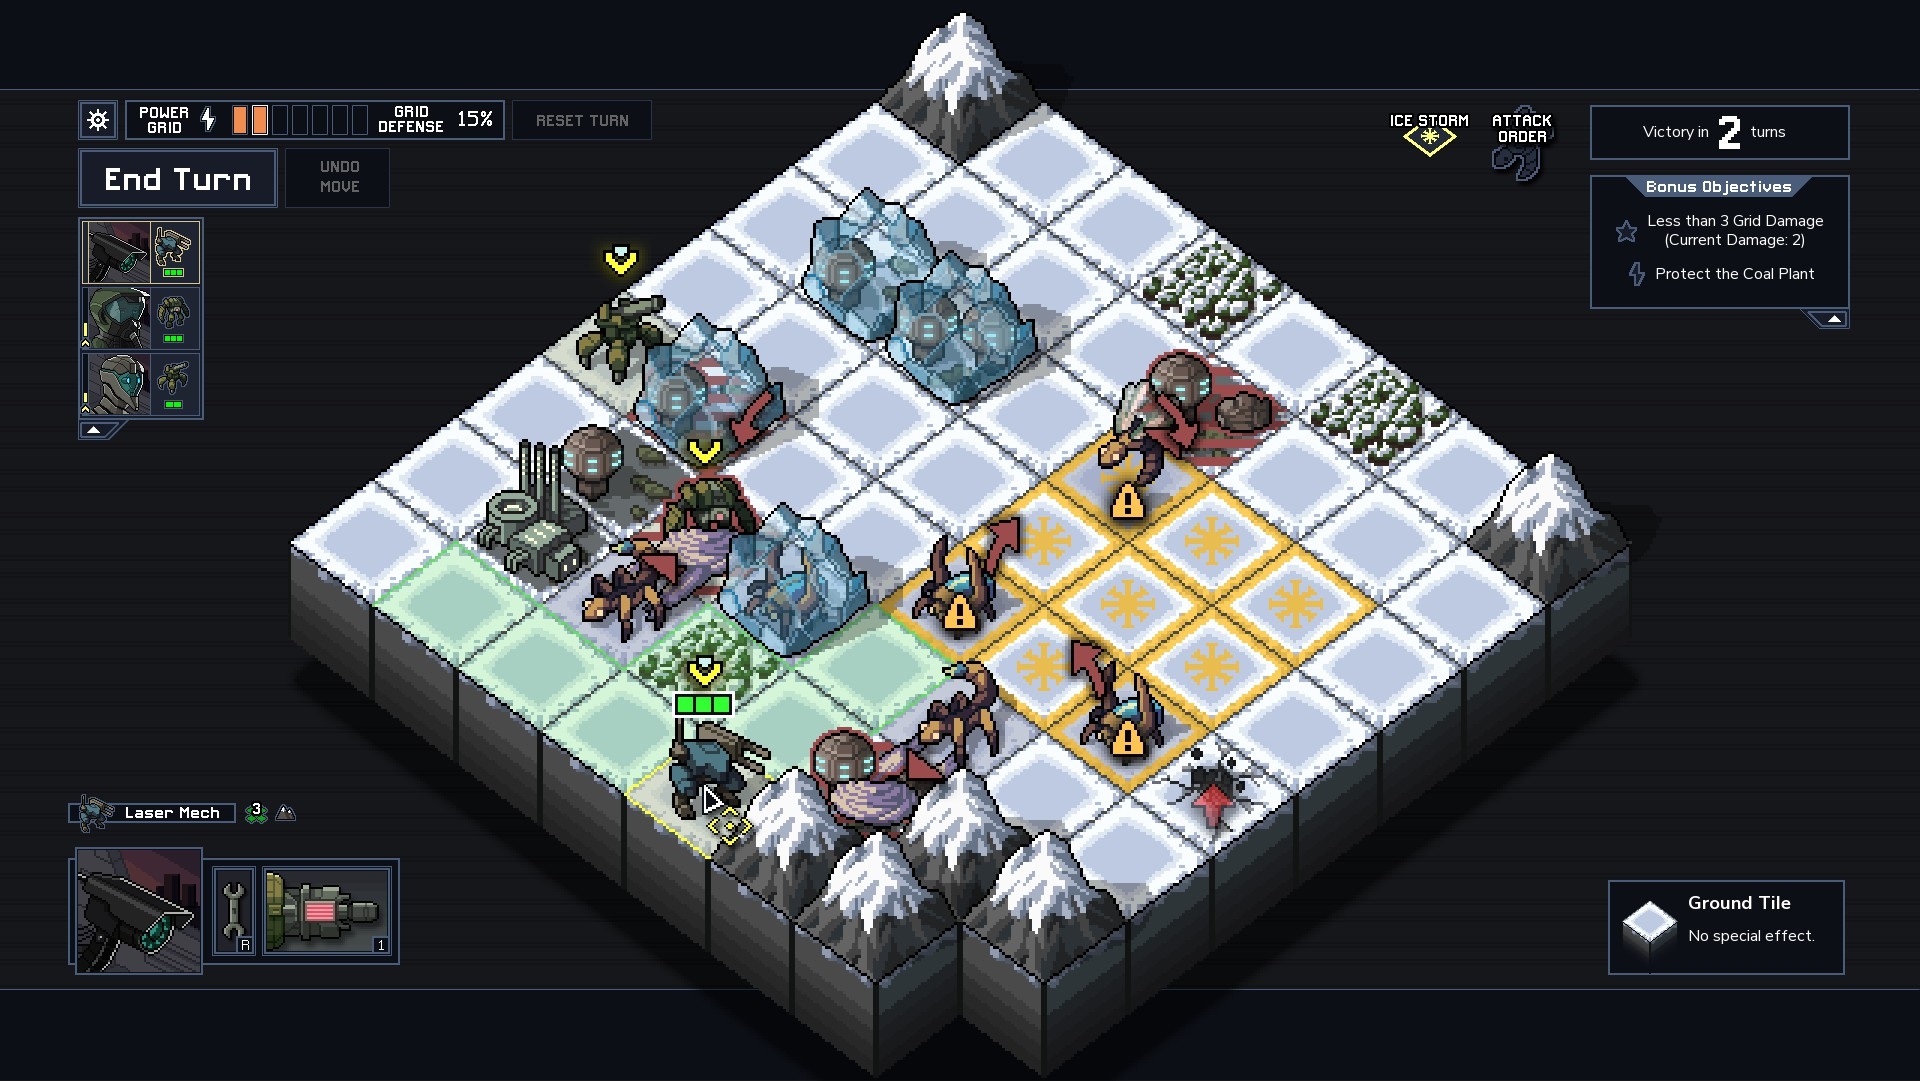 into the breach playstation download